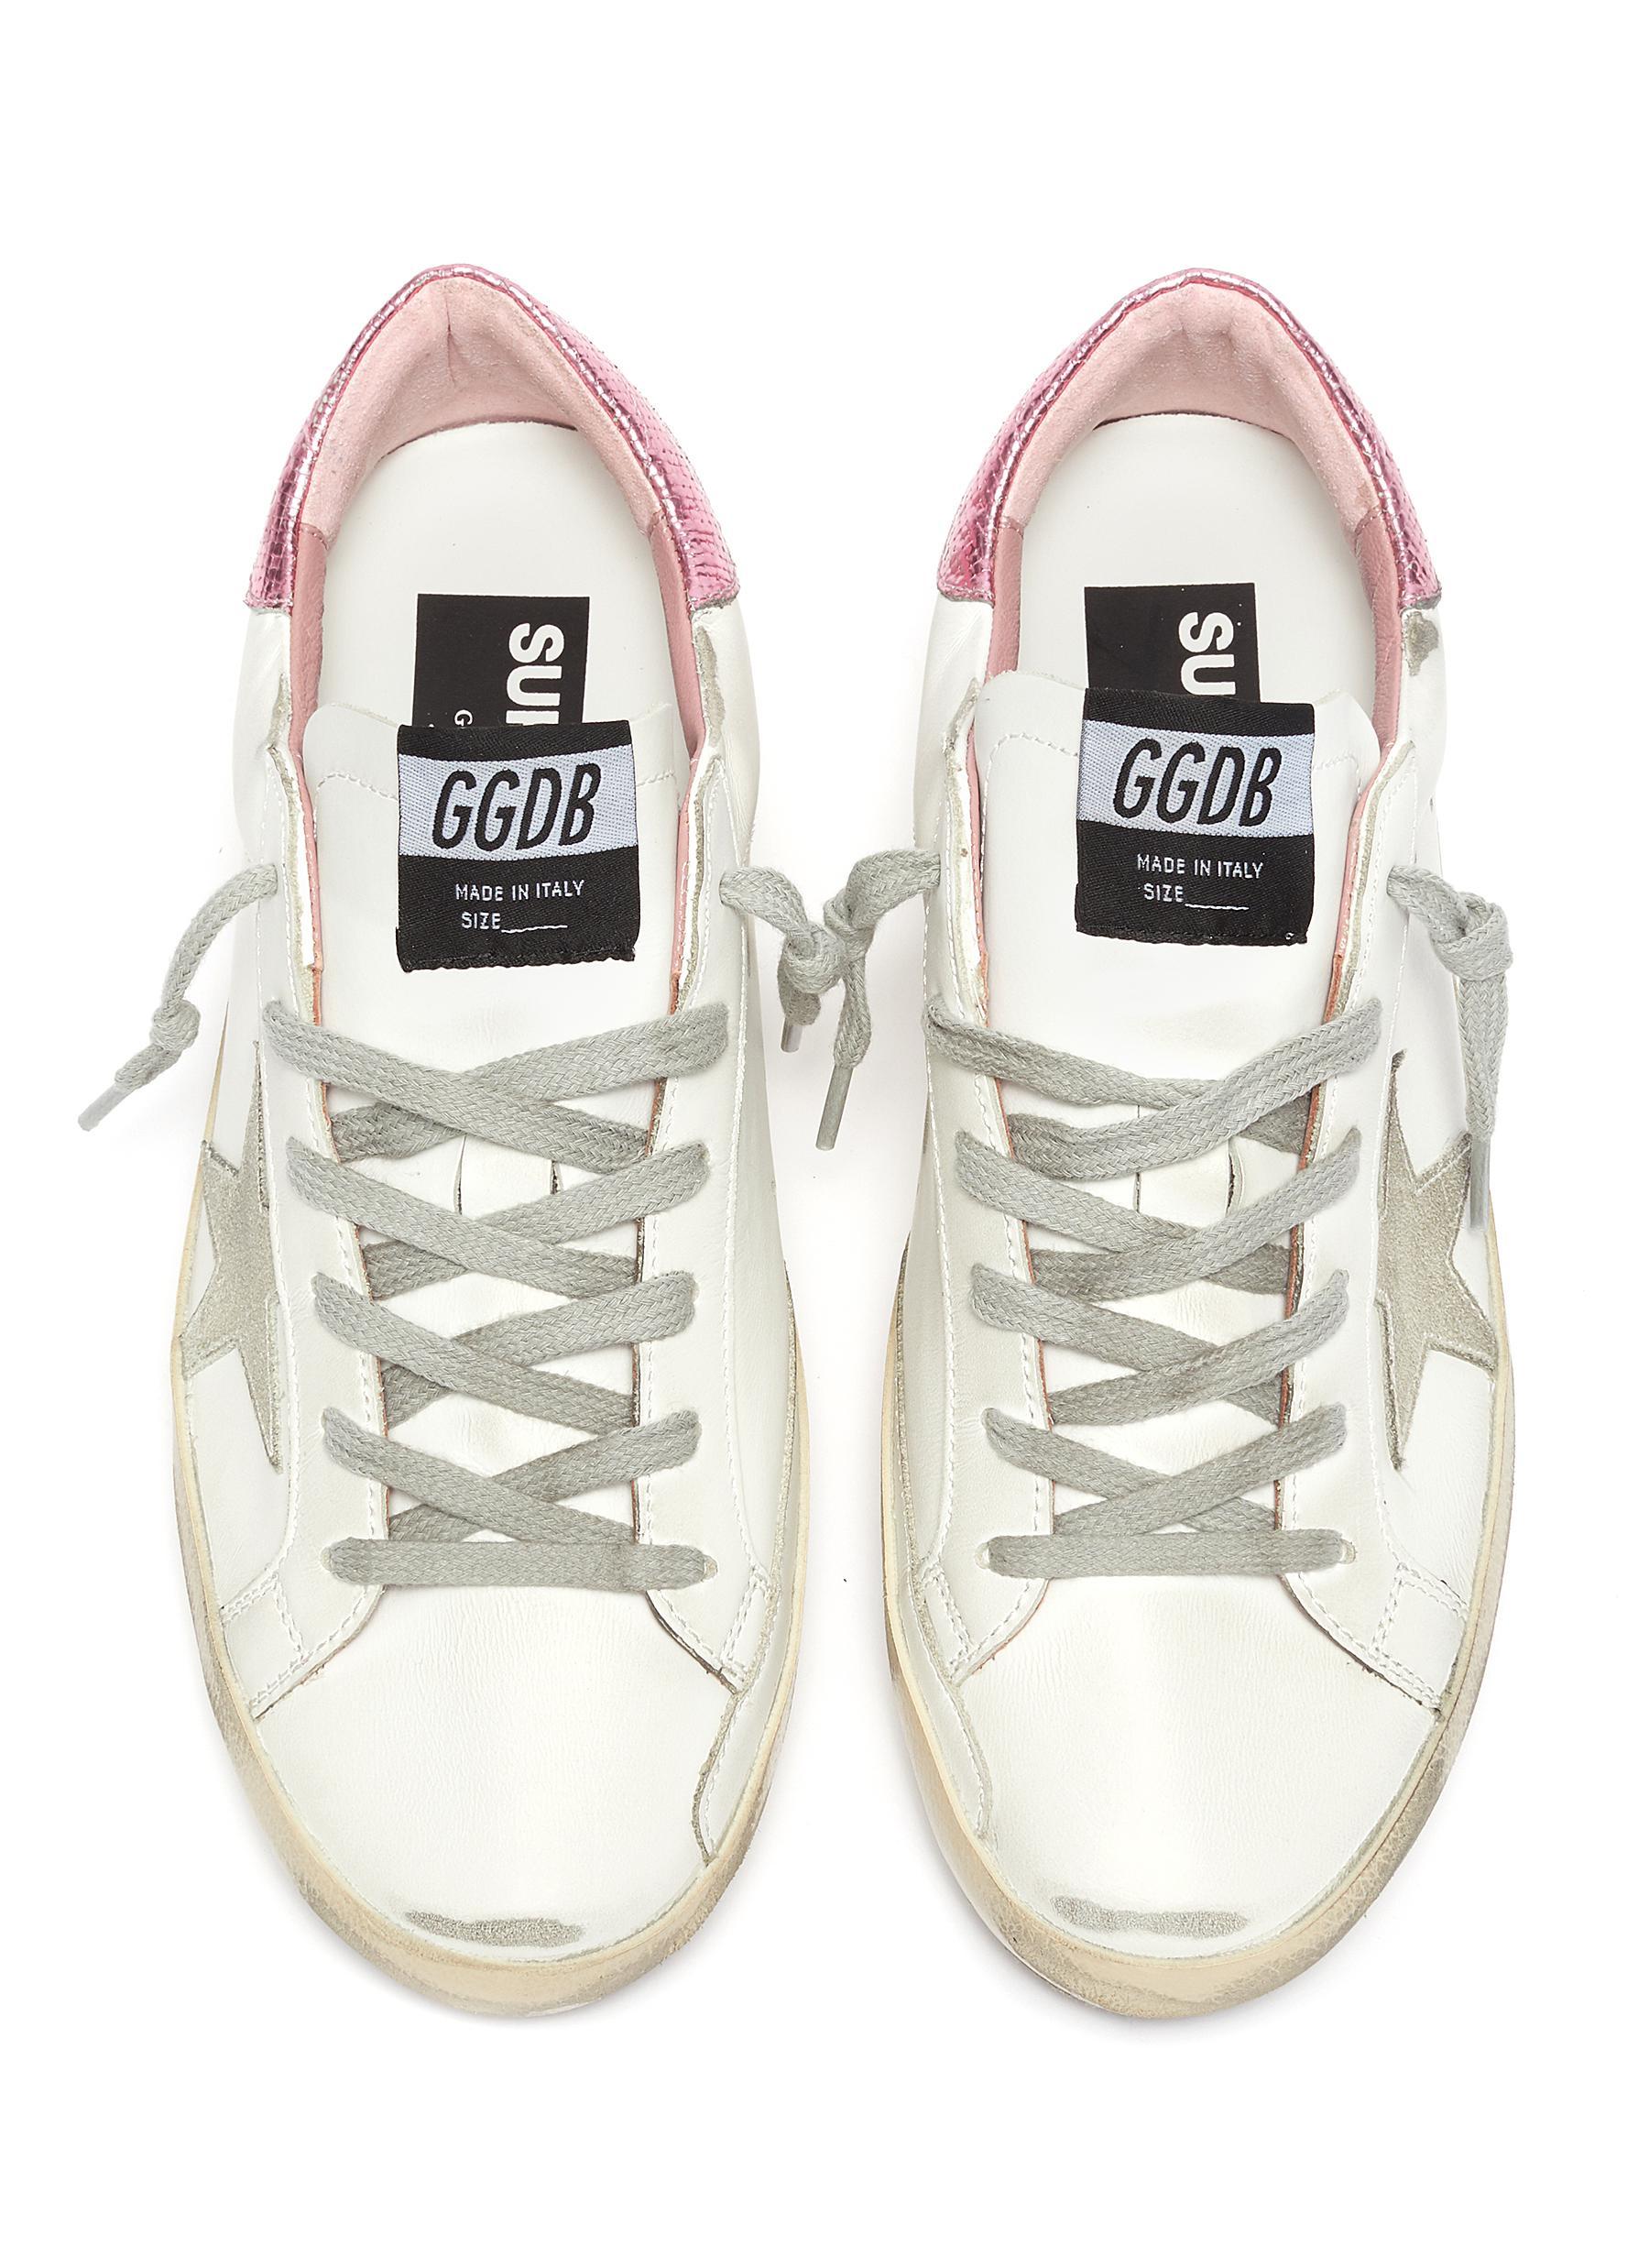 Golden Goose \'super-star\' Laminated Heel Tab Distressed Leather Sneakers in  White | Lyst